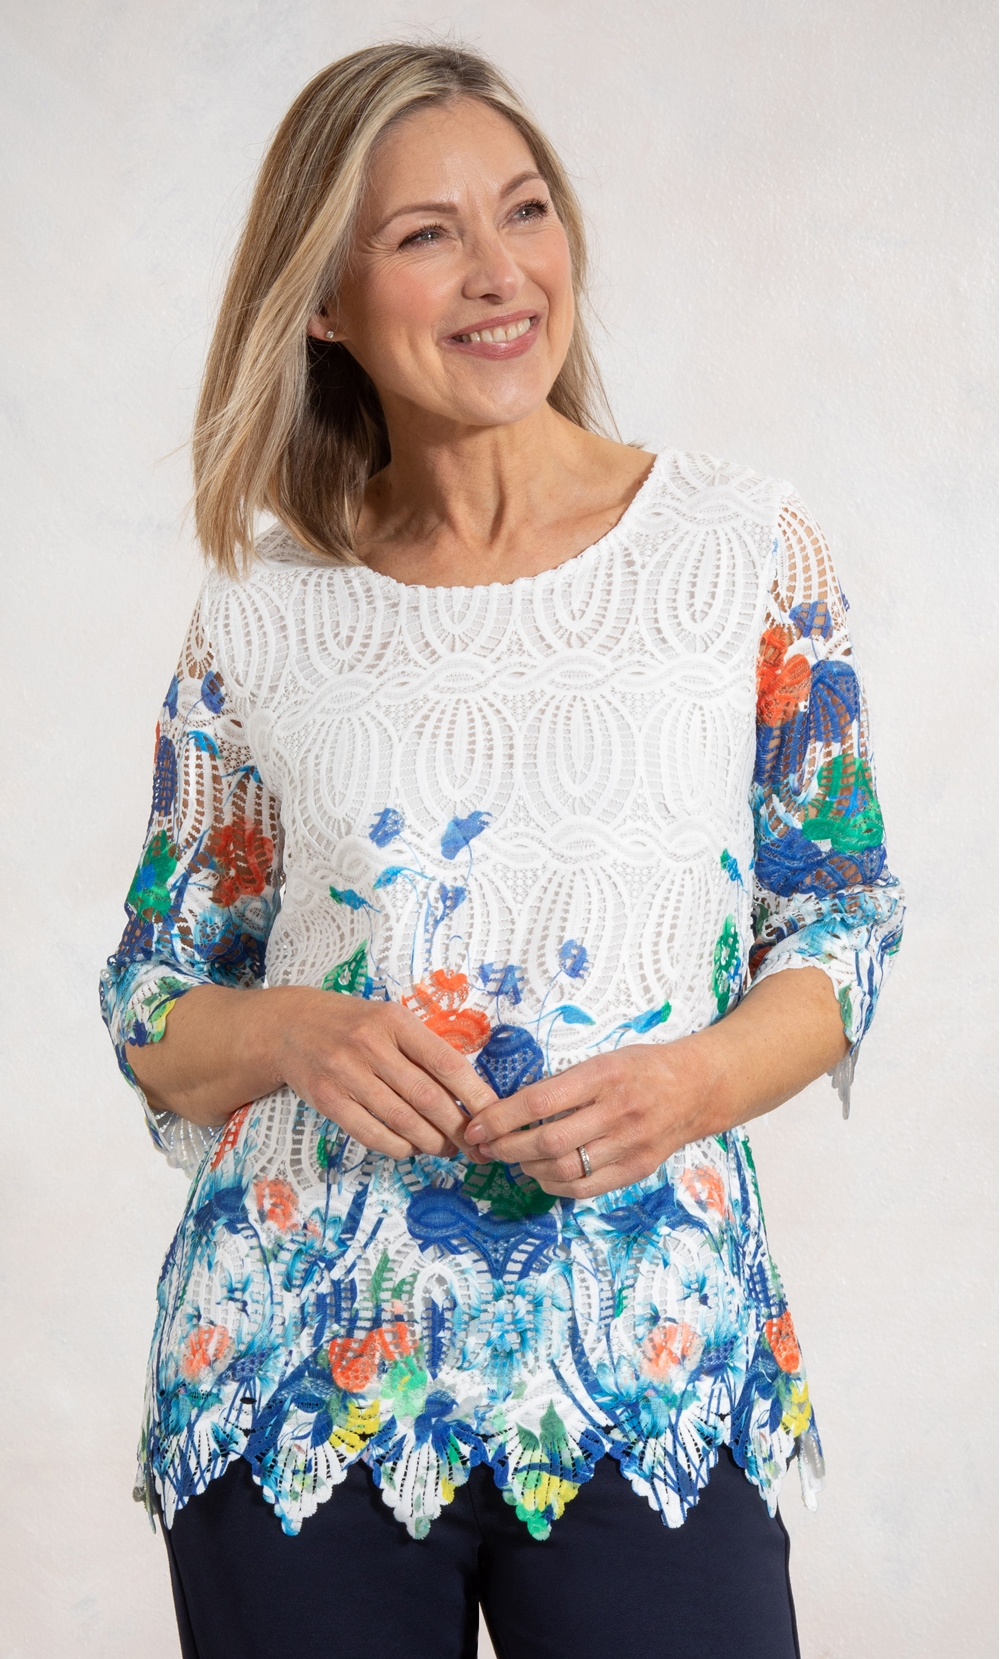 Anna Rose Border Printed Lace Top